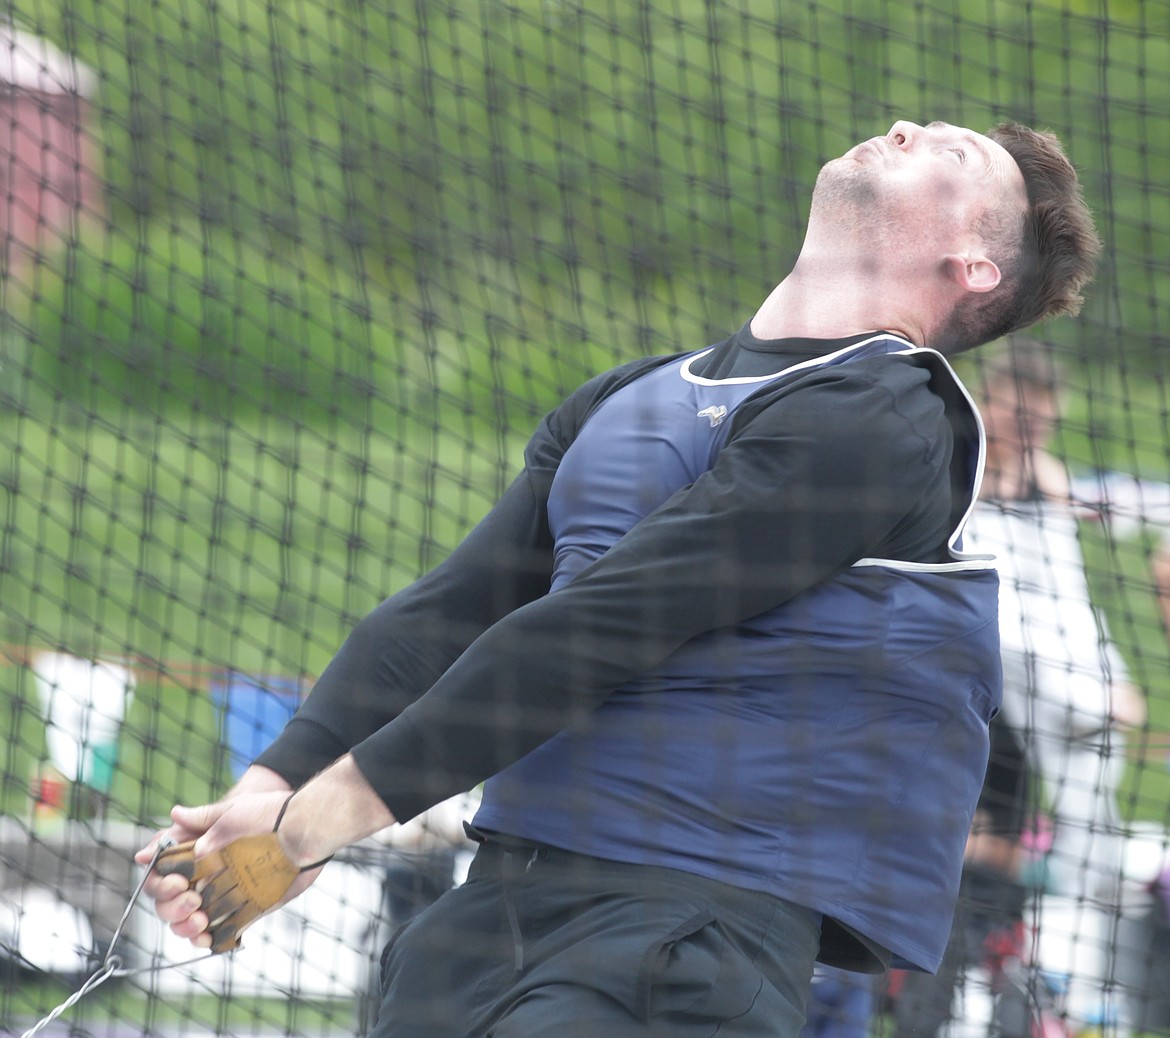 JASON ELLIOTT/Press
Justin Stafford, a 2019 UCLA graduate, makes an attempt during the men's hammer throw at the Iron Wood Throws Classic in Rathdrum on Saturday.